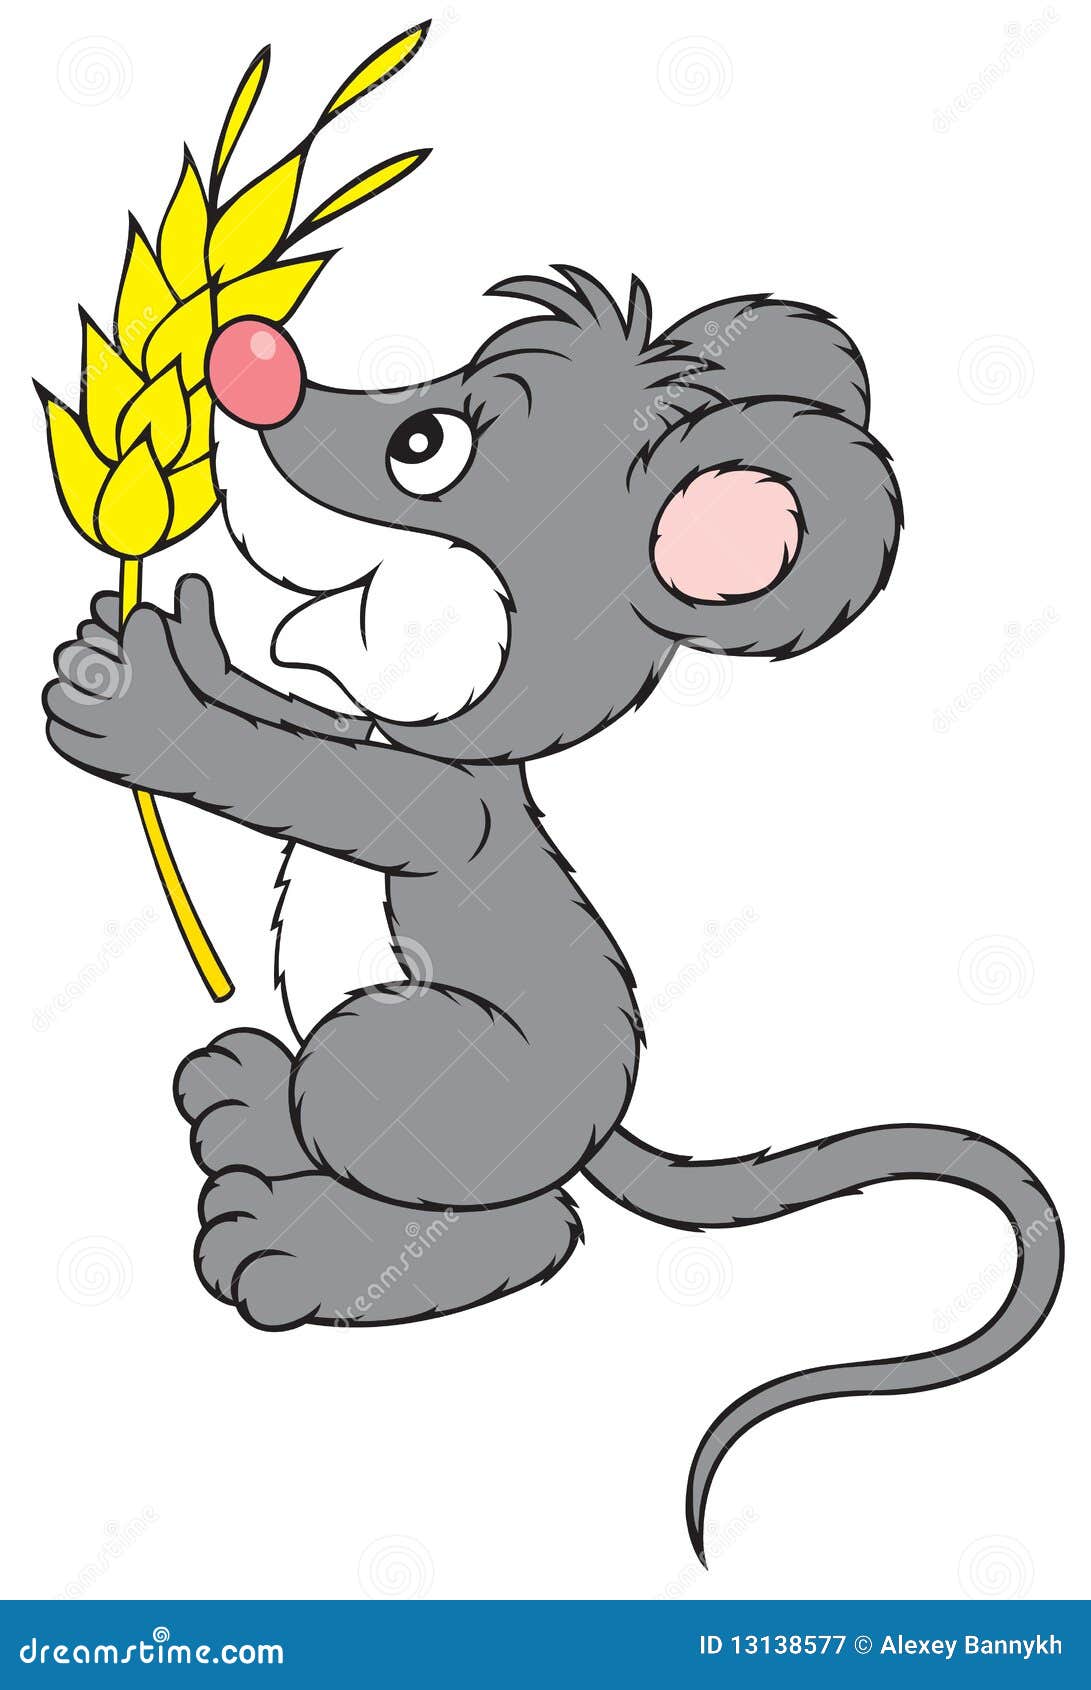 clipart of a little mouse - photo #23